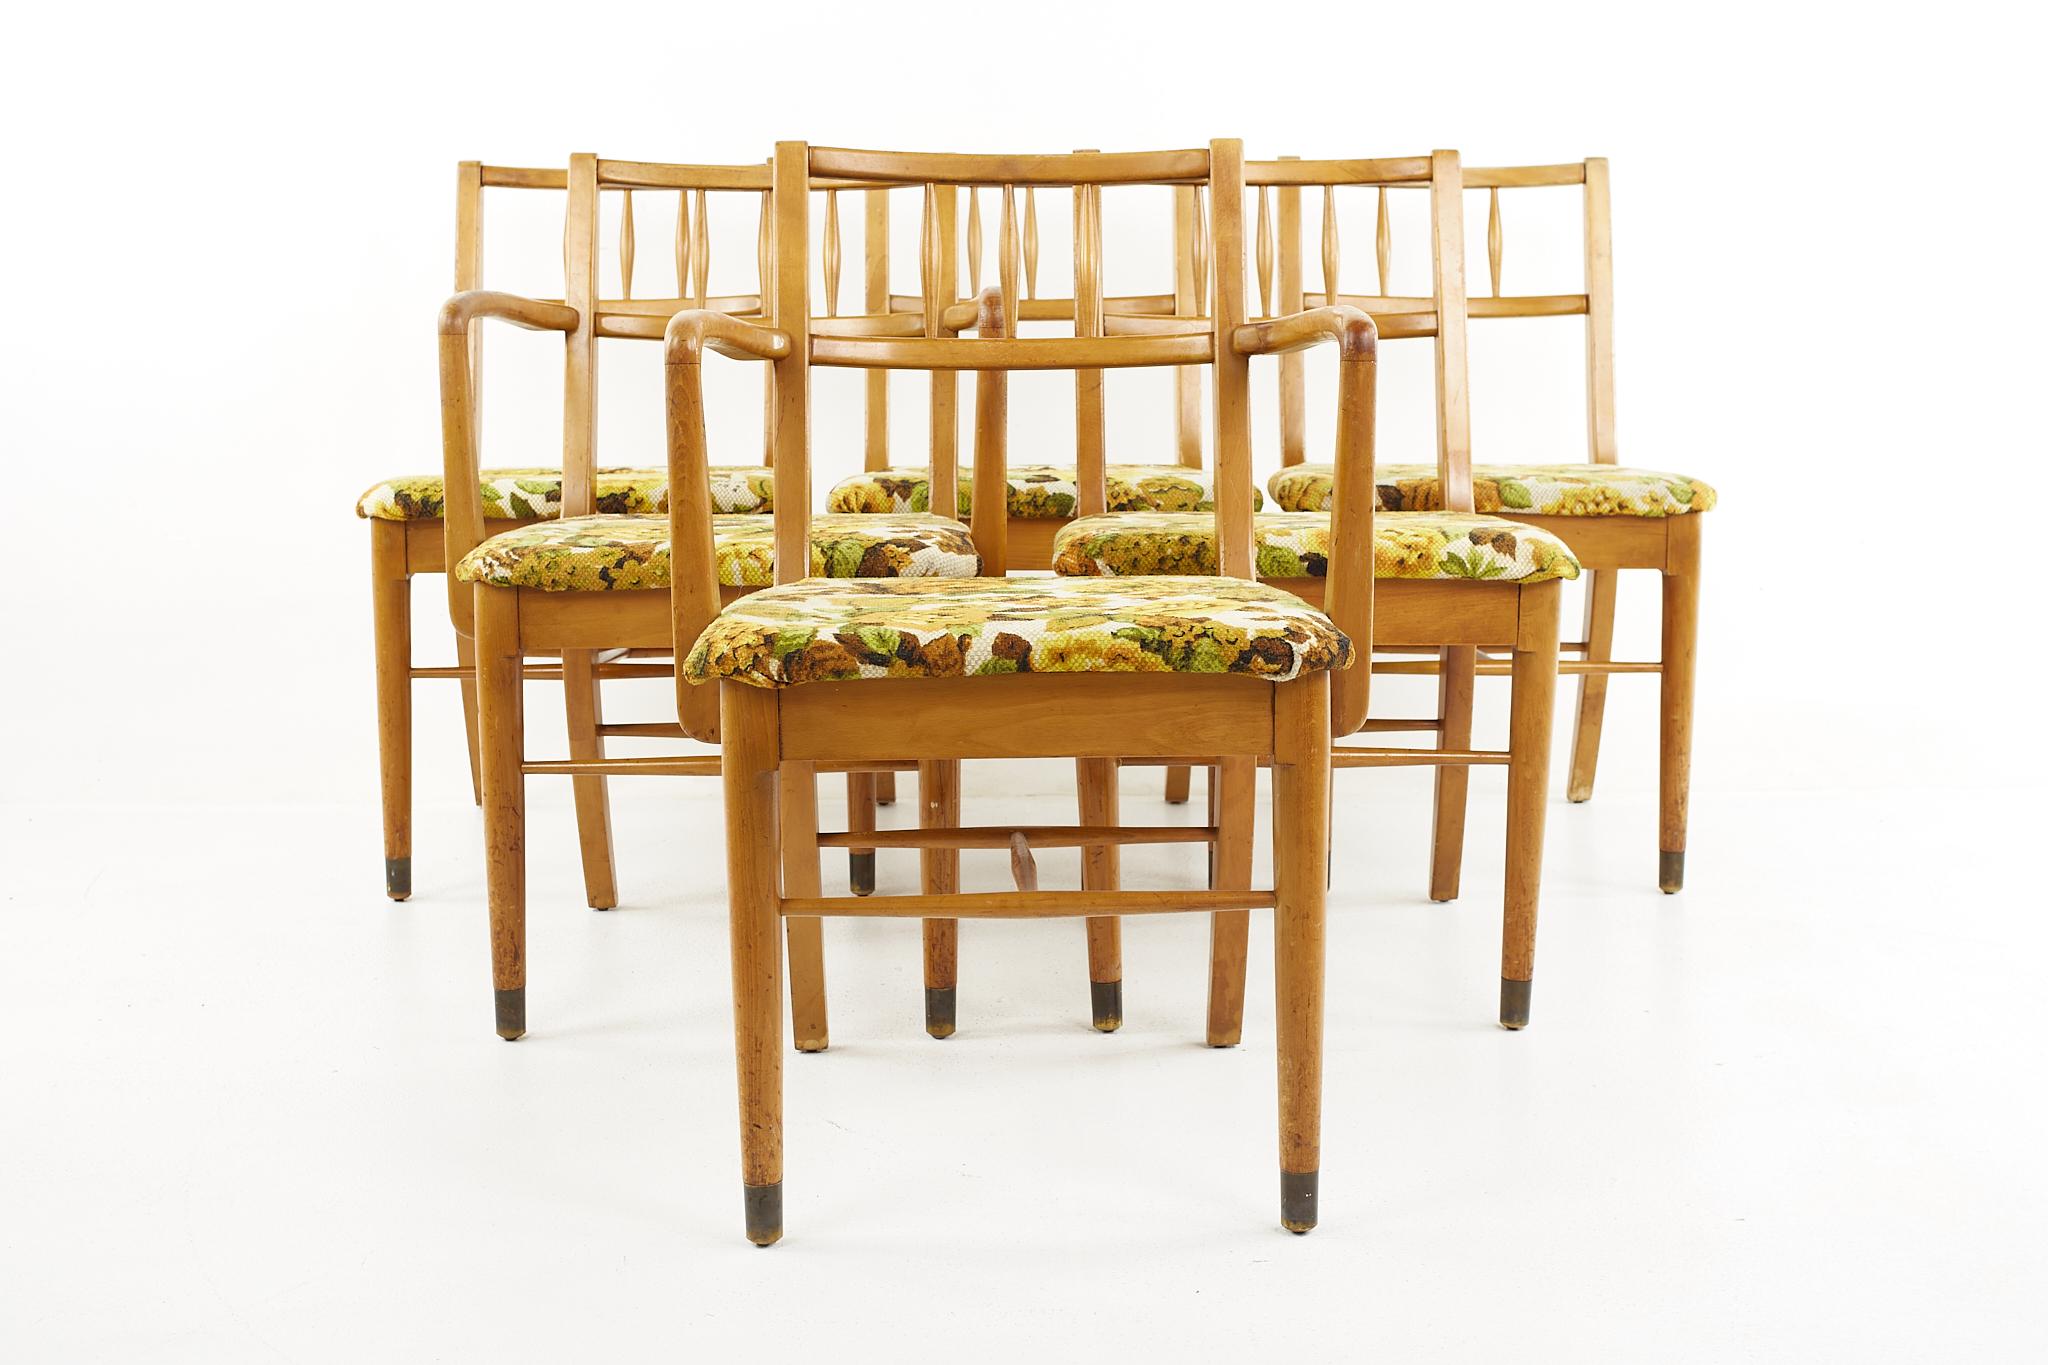 Drexel New Todays living mid century dining chairs - set of 6

Each chair measures: 21.25 wide x 21 deep x 33 high, with a seat height of 18 inches and arm height/chair clearance of 27.5 inches 

All pieces of furniture can be had in what we call